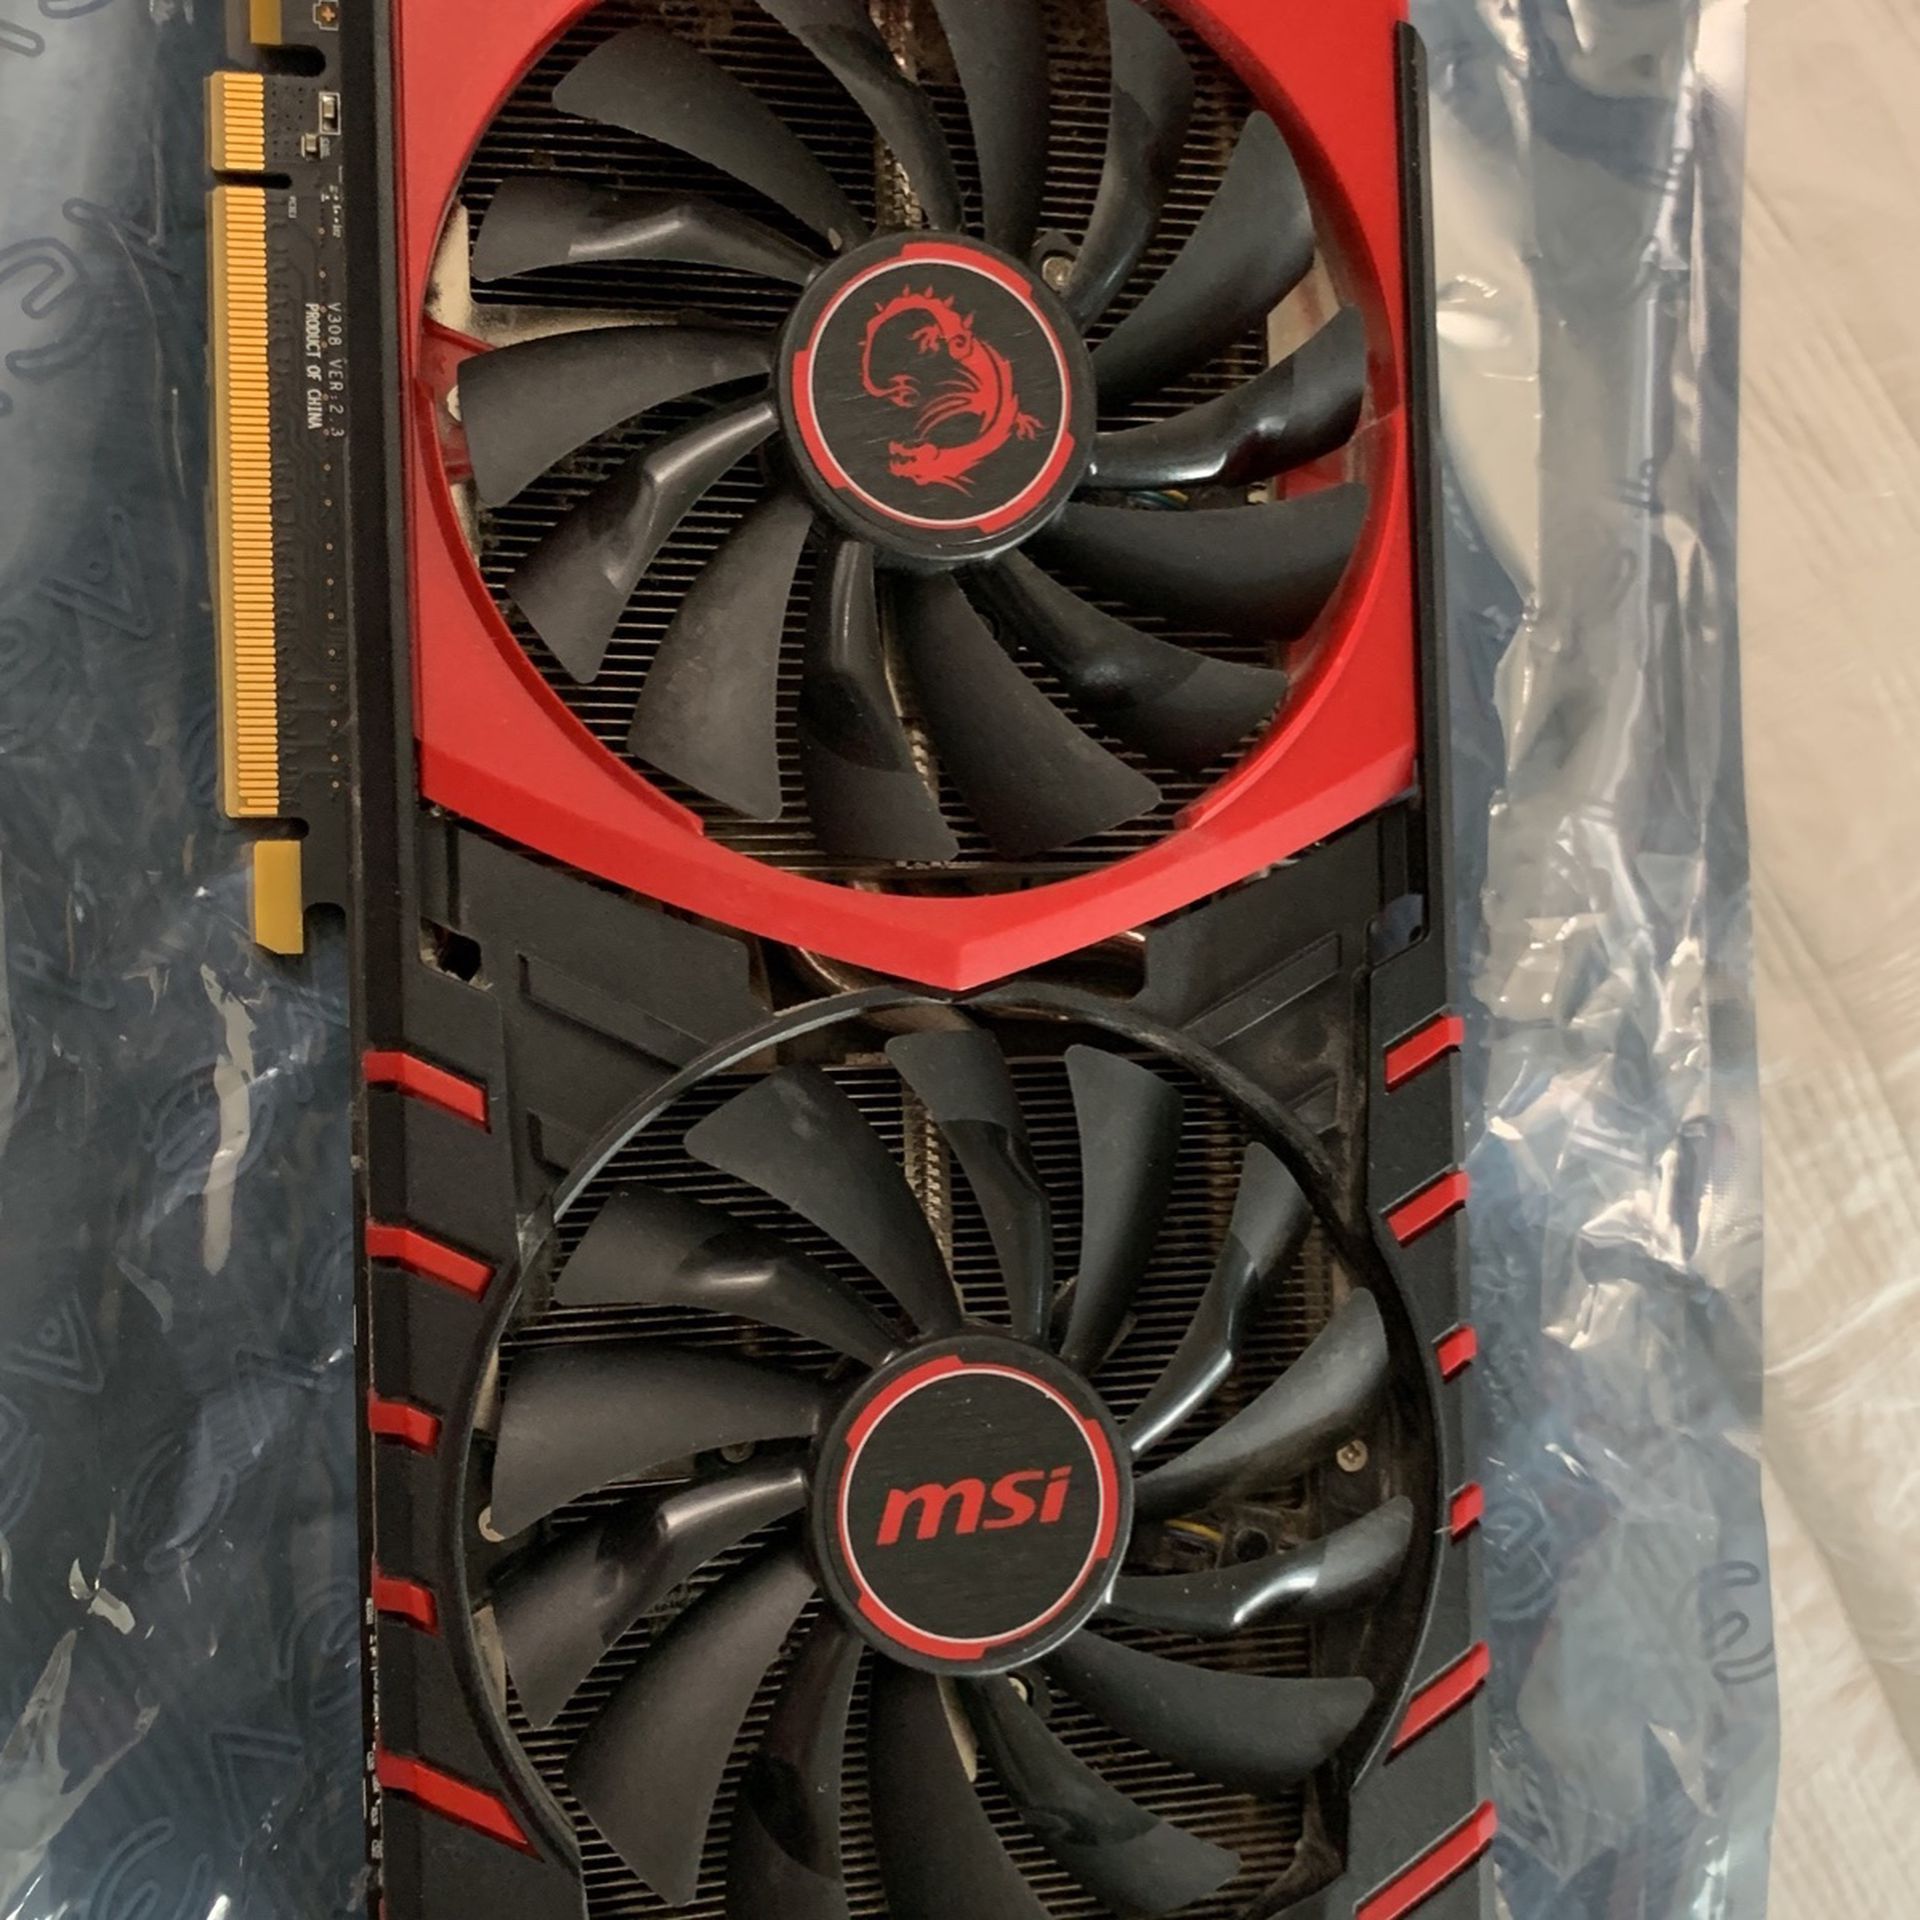 Used R9 390 PC Graphics Card